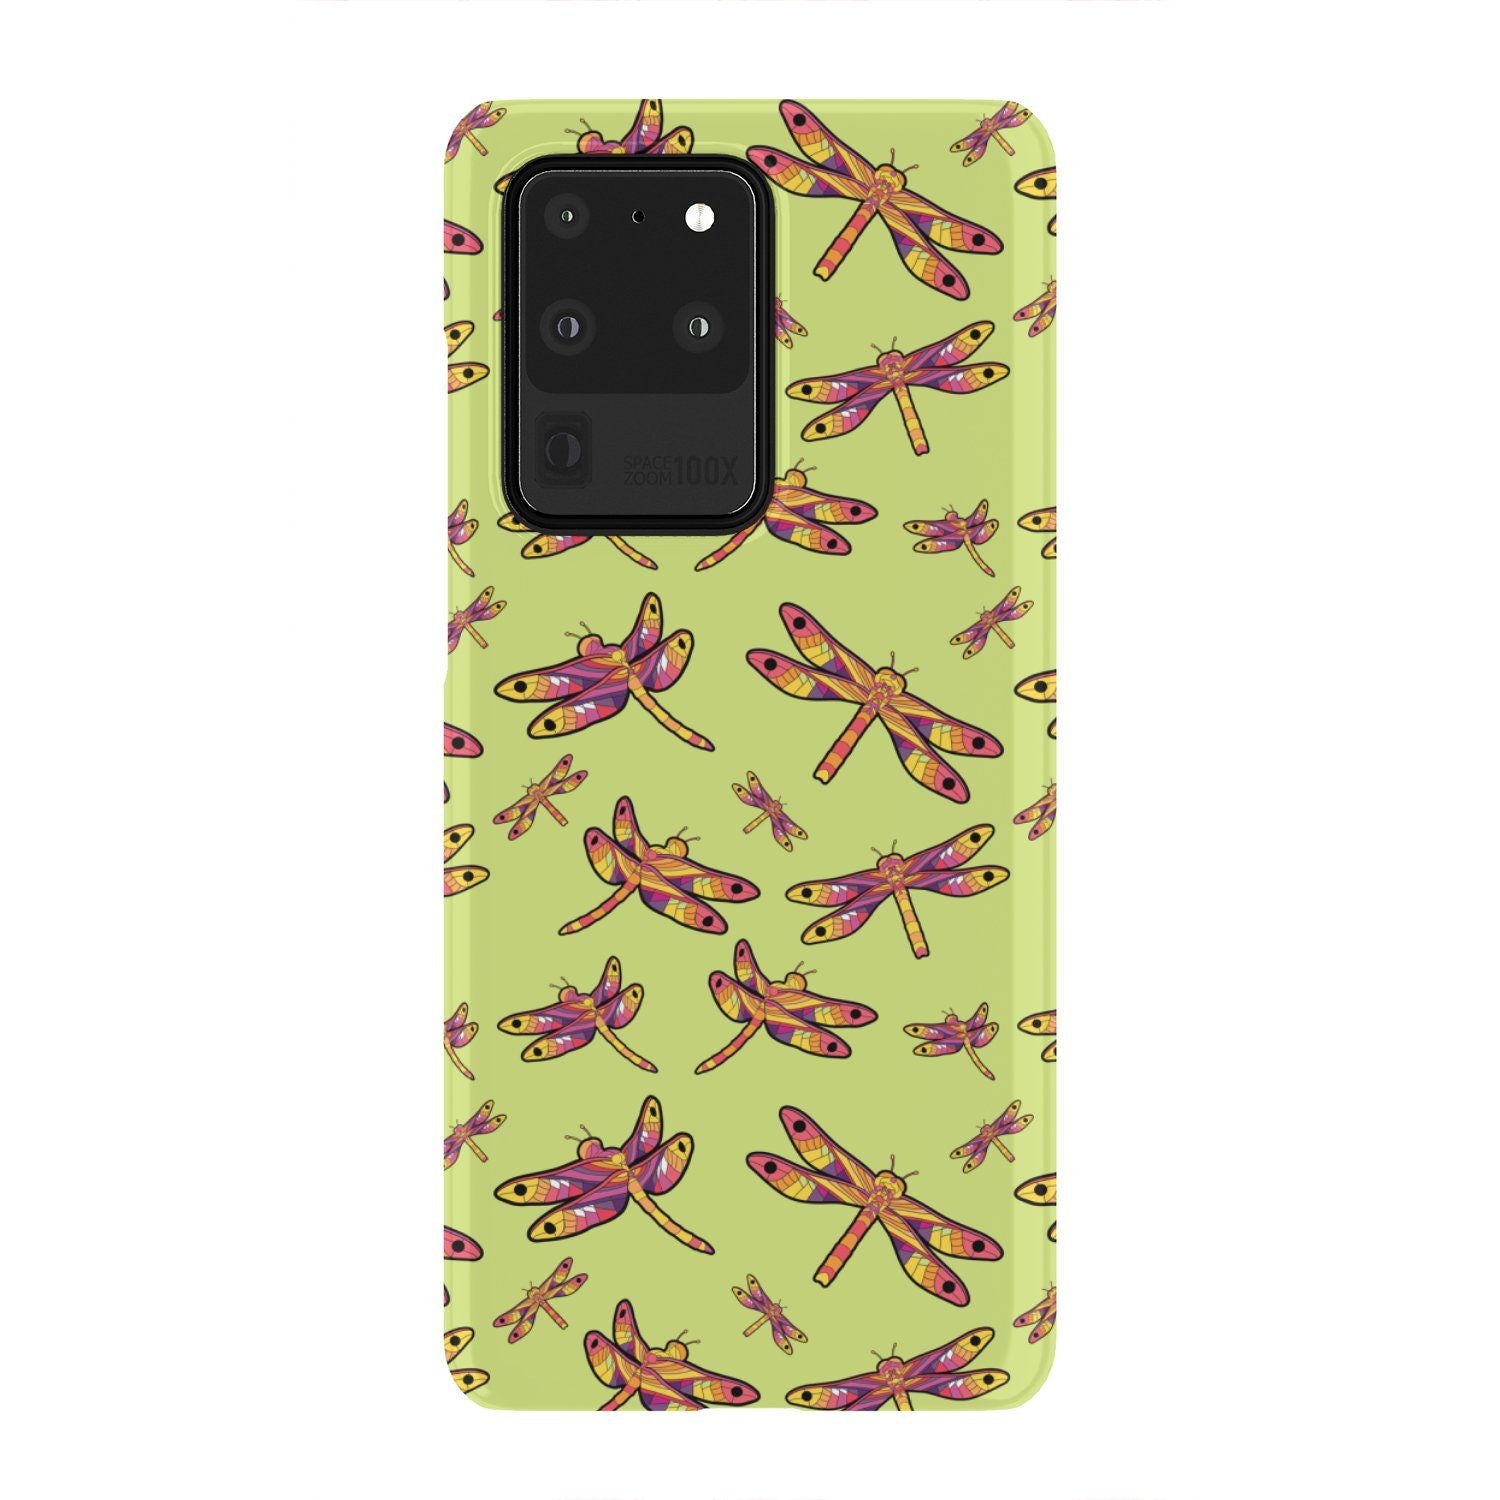 Gathering Lime Phone Case Phone Case wc-fulfillment Samsung Galaxy S20 Ultra 